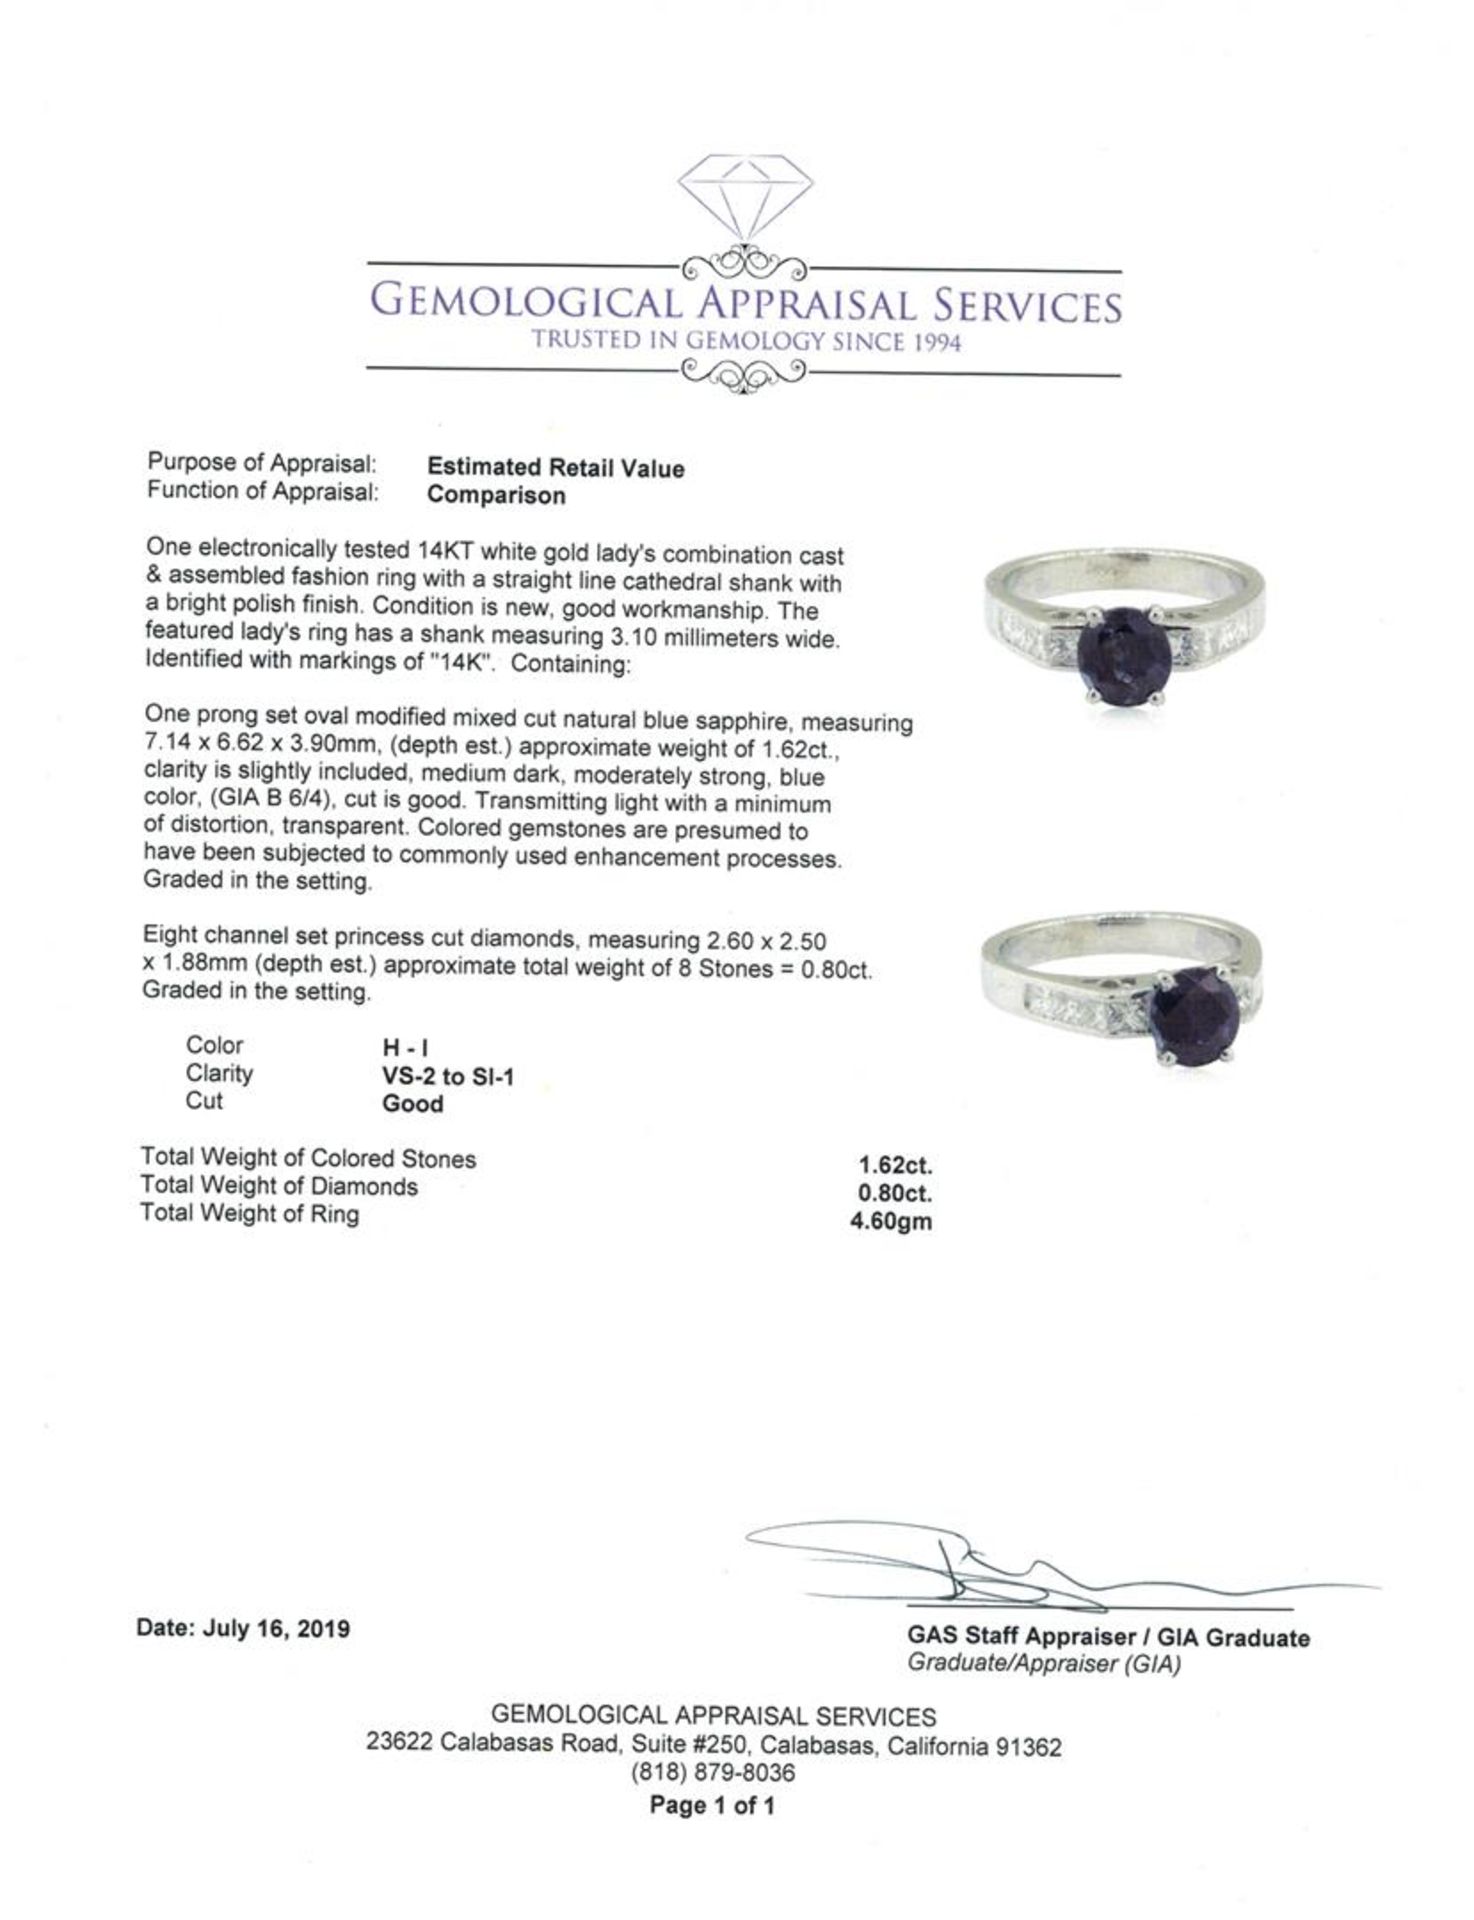 2.42 ctw Sapphire and Diamond Ring - 14KT White Gold - Image 5 of 5